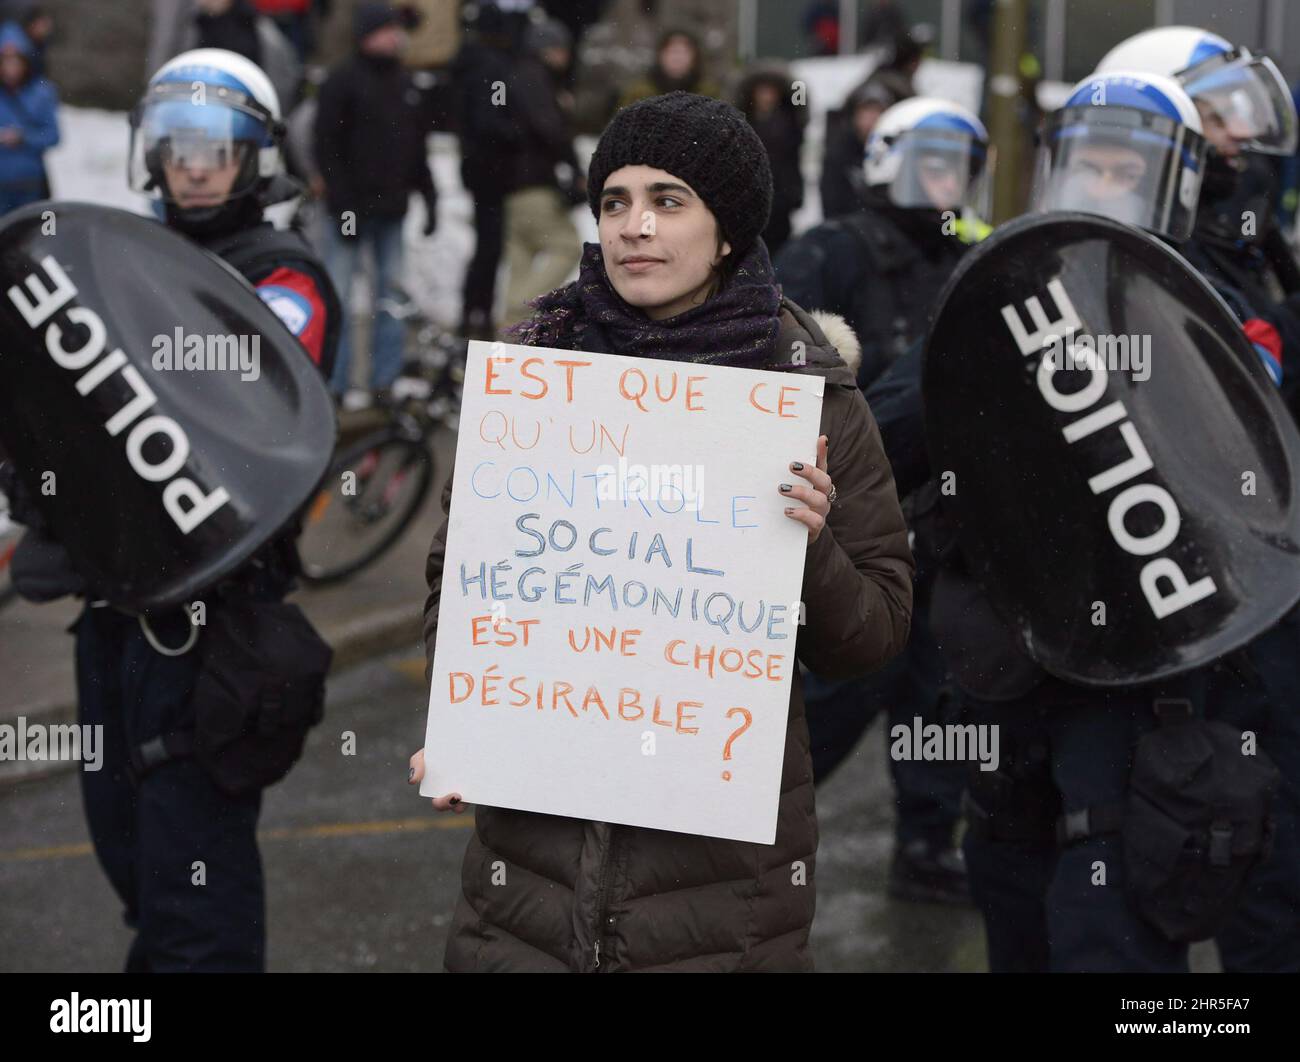 People participate in an anti-police brutality demonstration in Montreal on Friday March 15, 2013. Police used horses, pepper-spray and kettling tactics to clamp down Friday on an annual protest that has a history of getting rowdy.THE CANADIAN PRESS/Ryan Remiorz Stock Photo